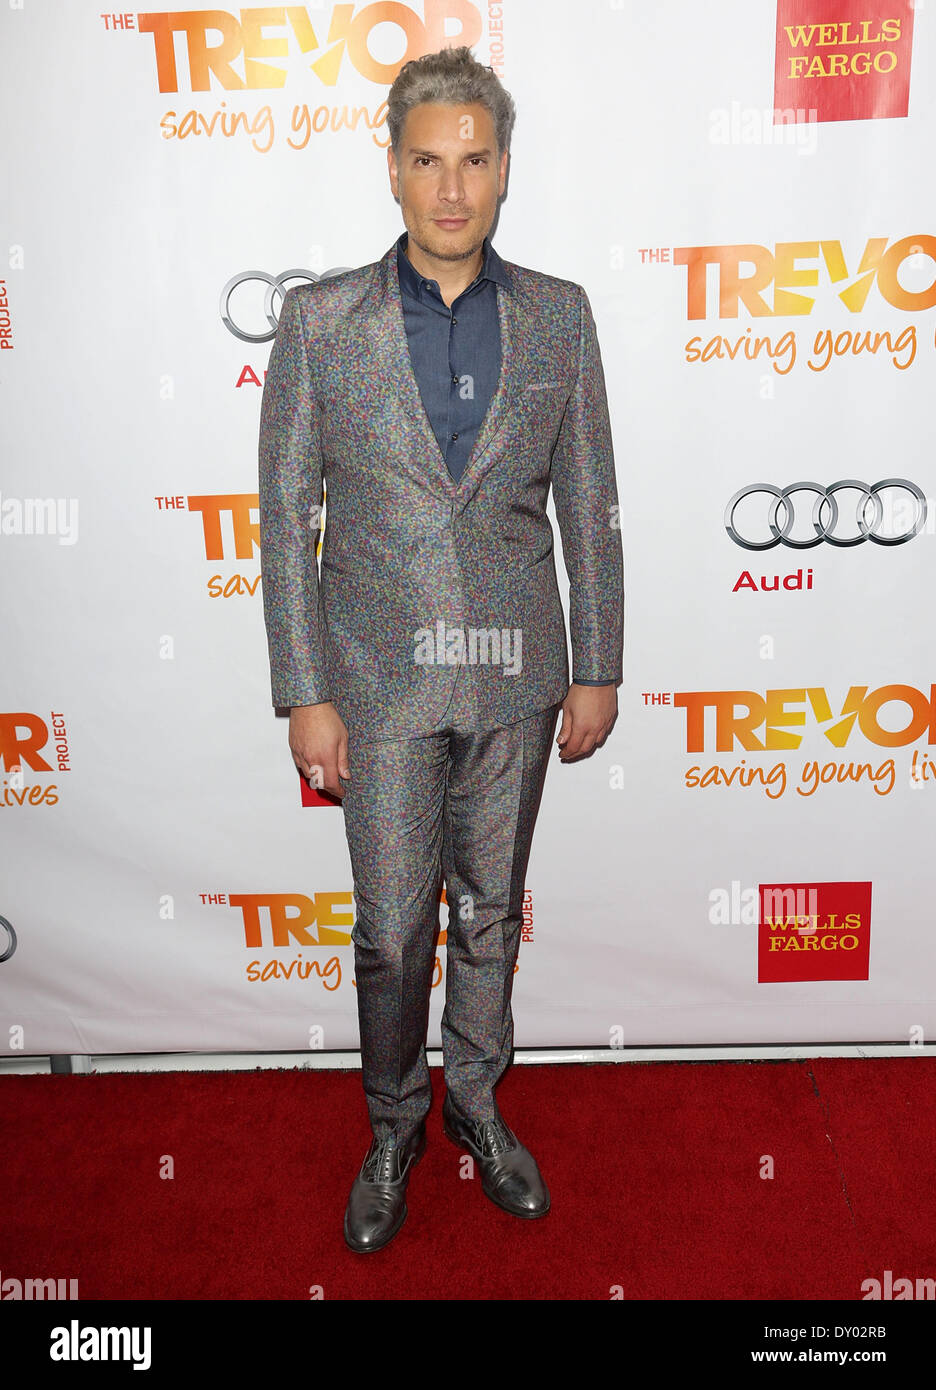 Trevor Live' honours Katy Perry and Audi of America for 'The Trevor Project' held at The Hollywood Palladium - Arrivals Featuring: Cameron Silver Where: Hollywood California USA When: 01 Dec 2012 Stock Photo